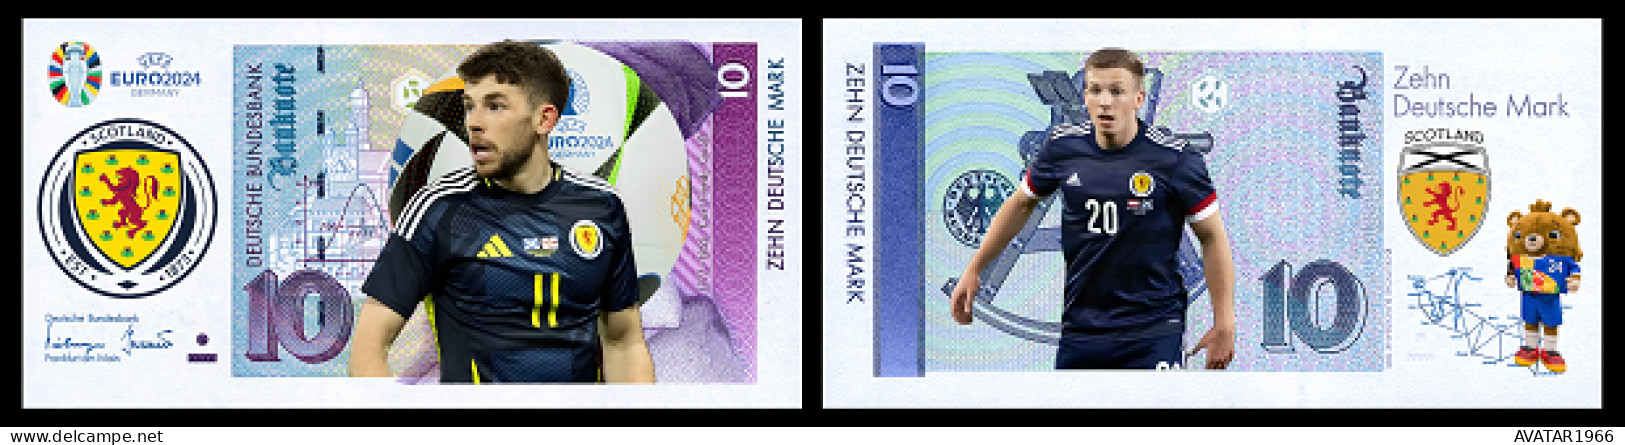 UEFA European Football Championship 2024 Qualified Country Scotland  8 Pieces Germany Fantasy Paper Money - [15] Commemoratives & Special Issues